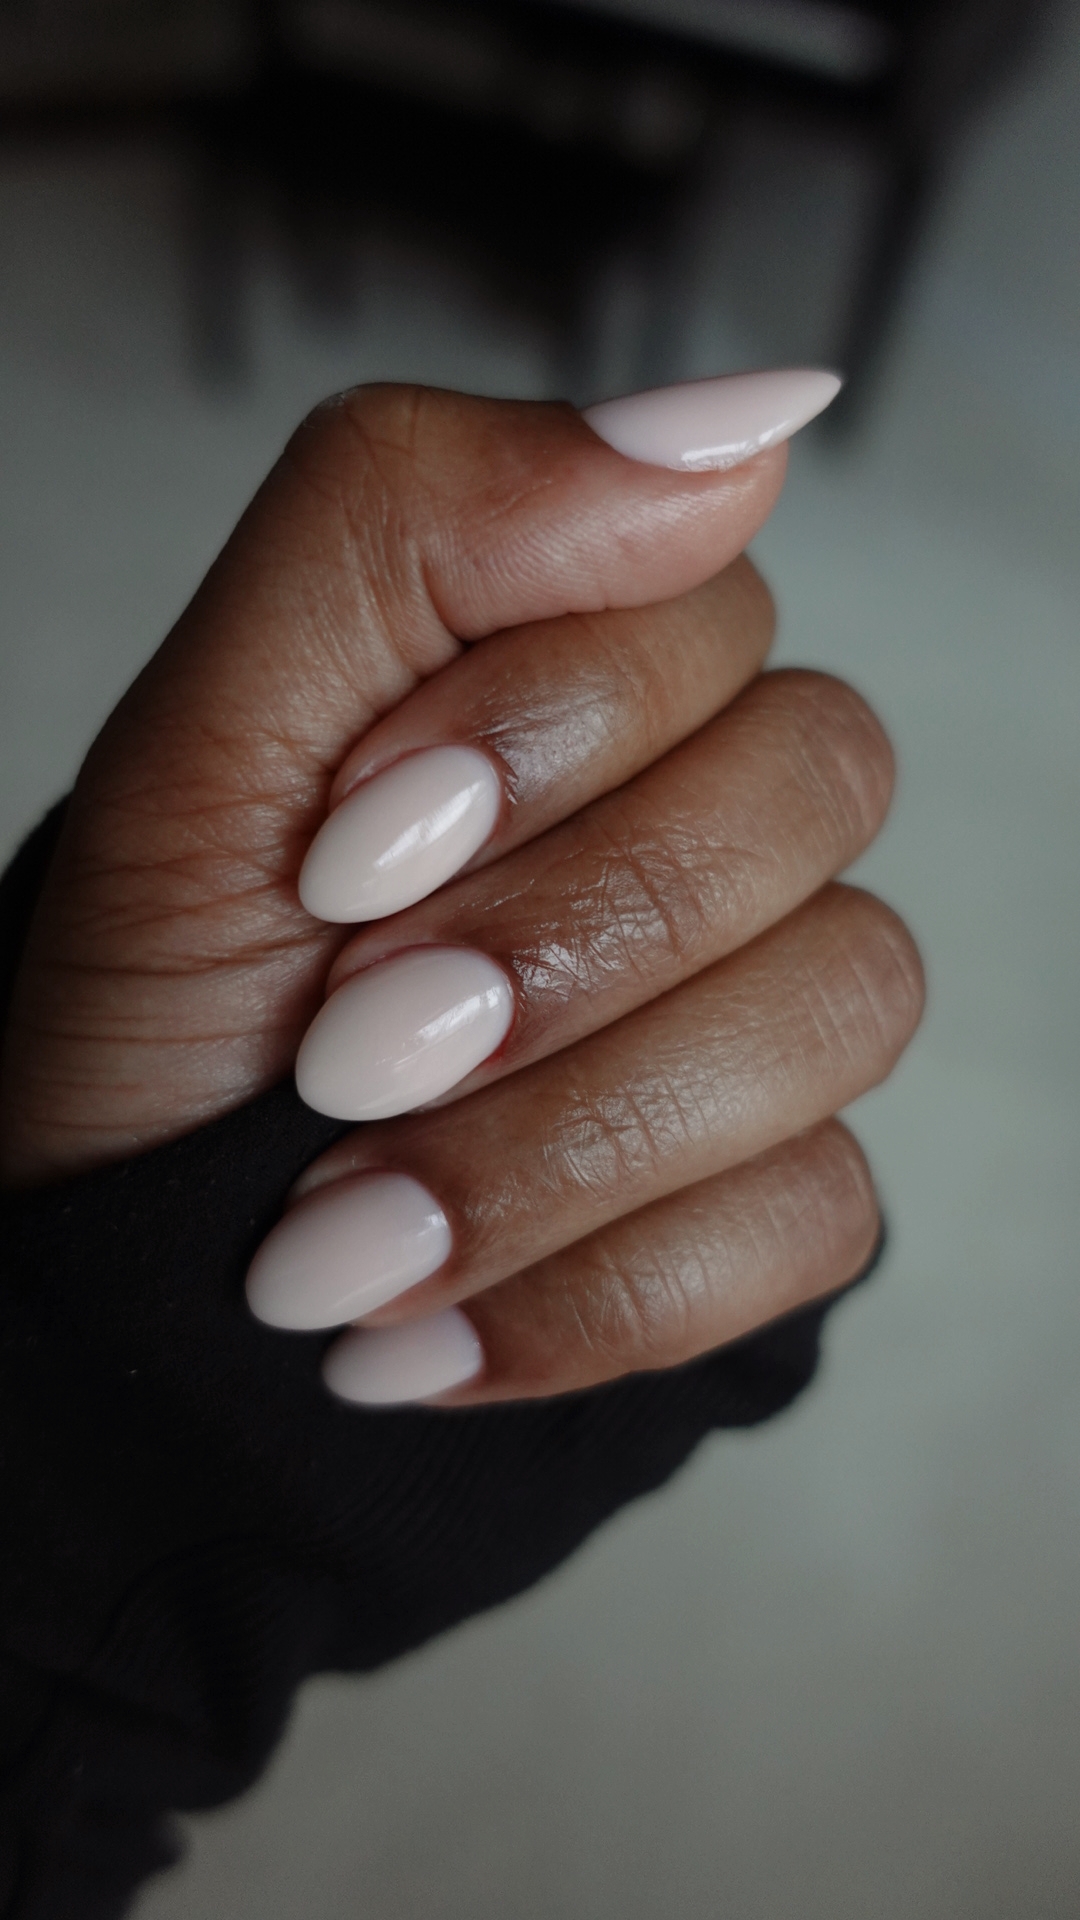 Almost three months after my first structured gel manicure and I’m obsessed.